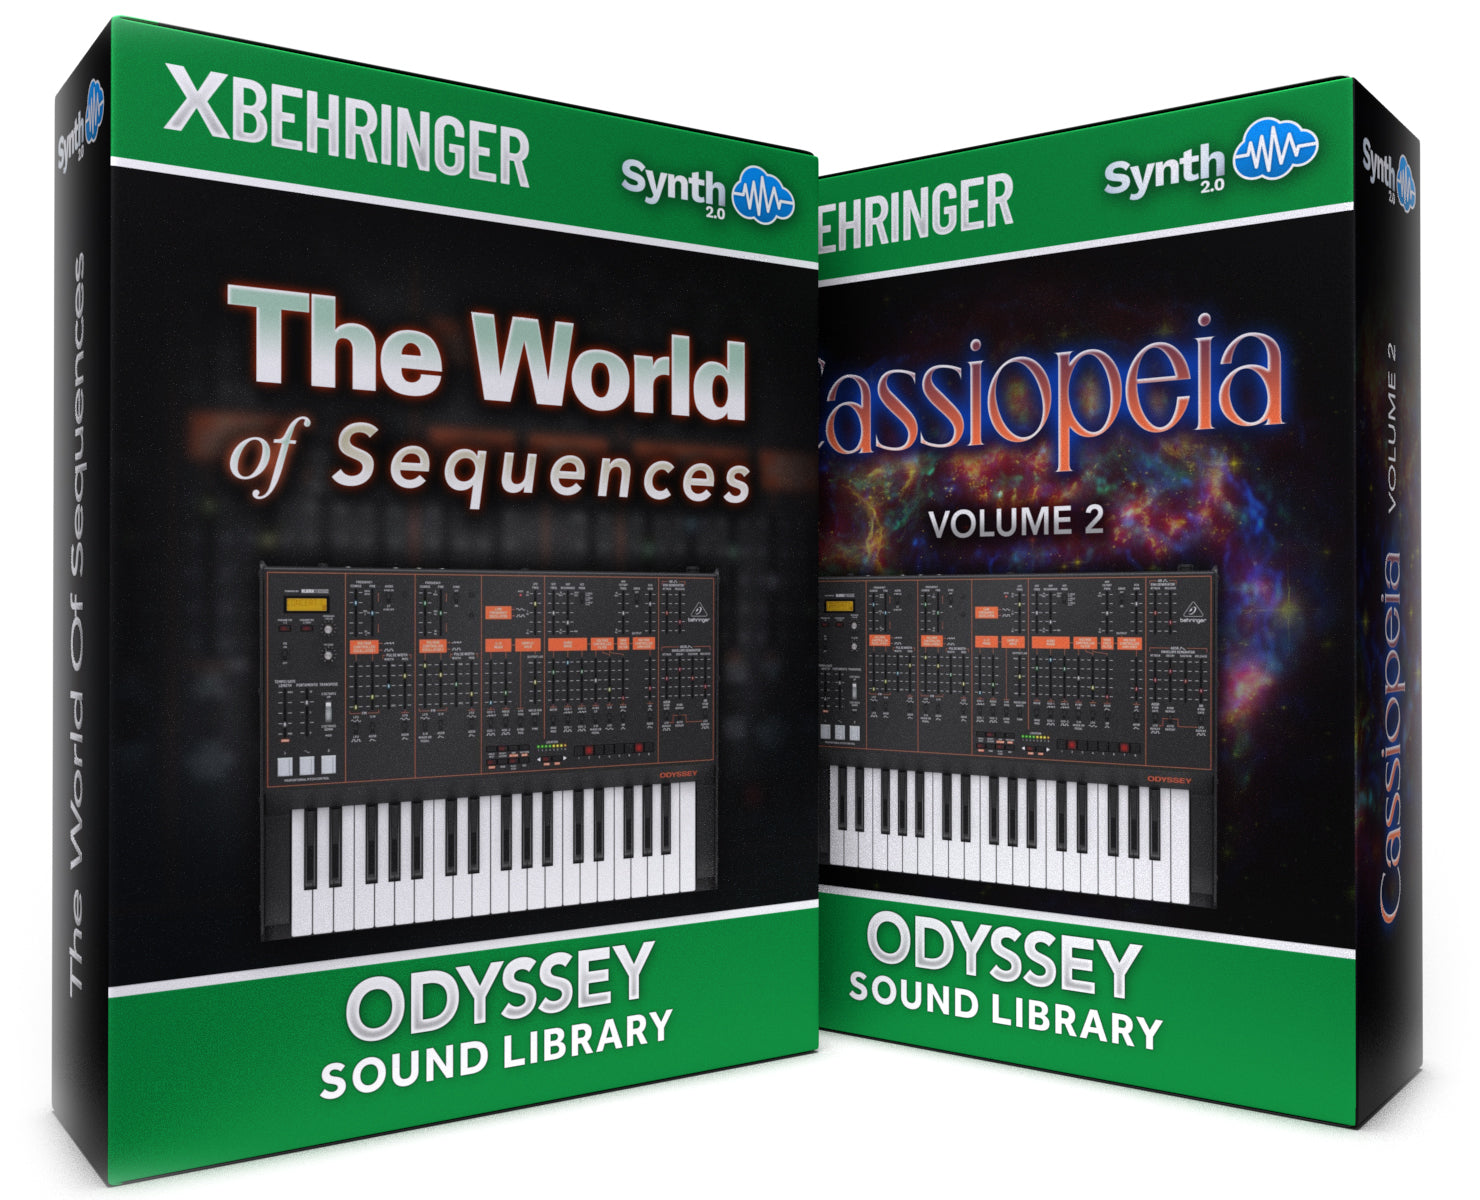 LFO092 - ( Bundle ) - The World of Sequences + Cassiopeia V2 - Behringer Odyssey